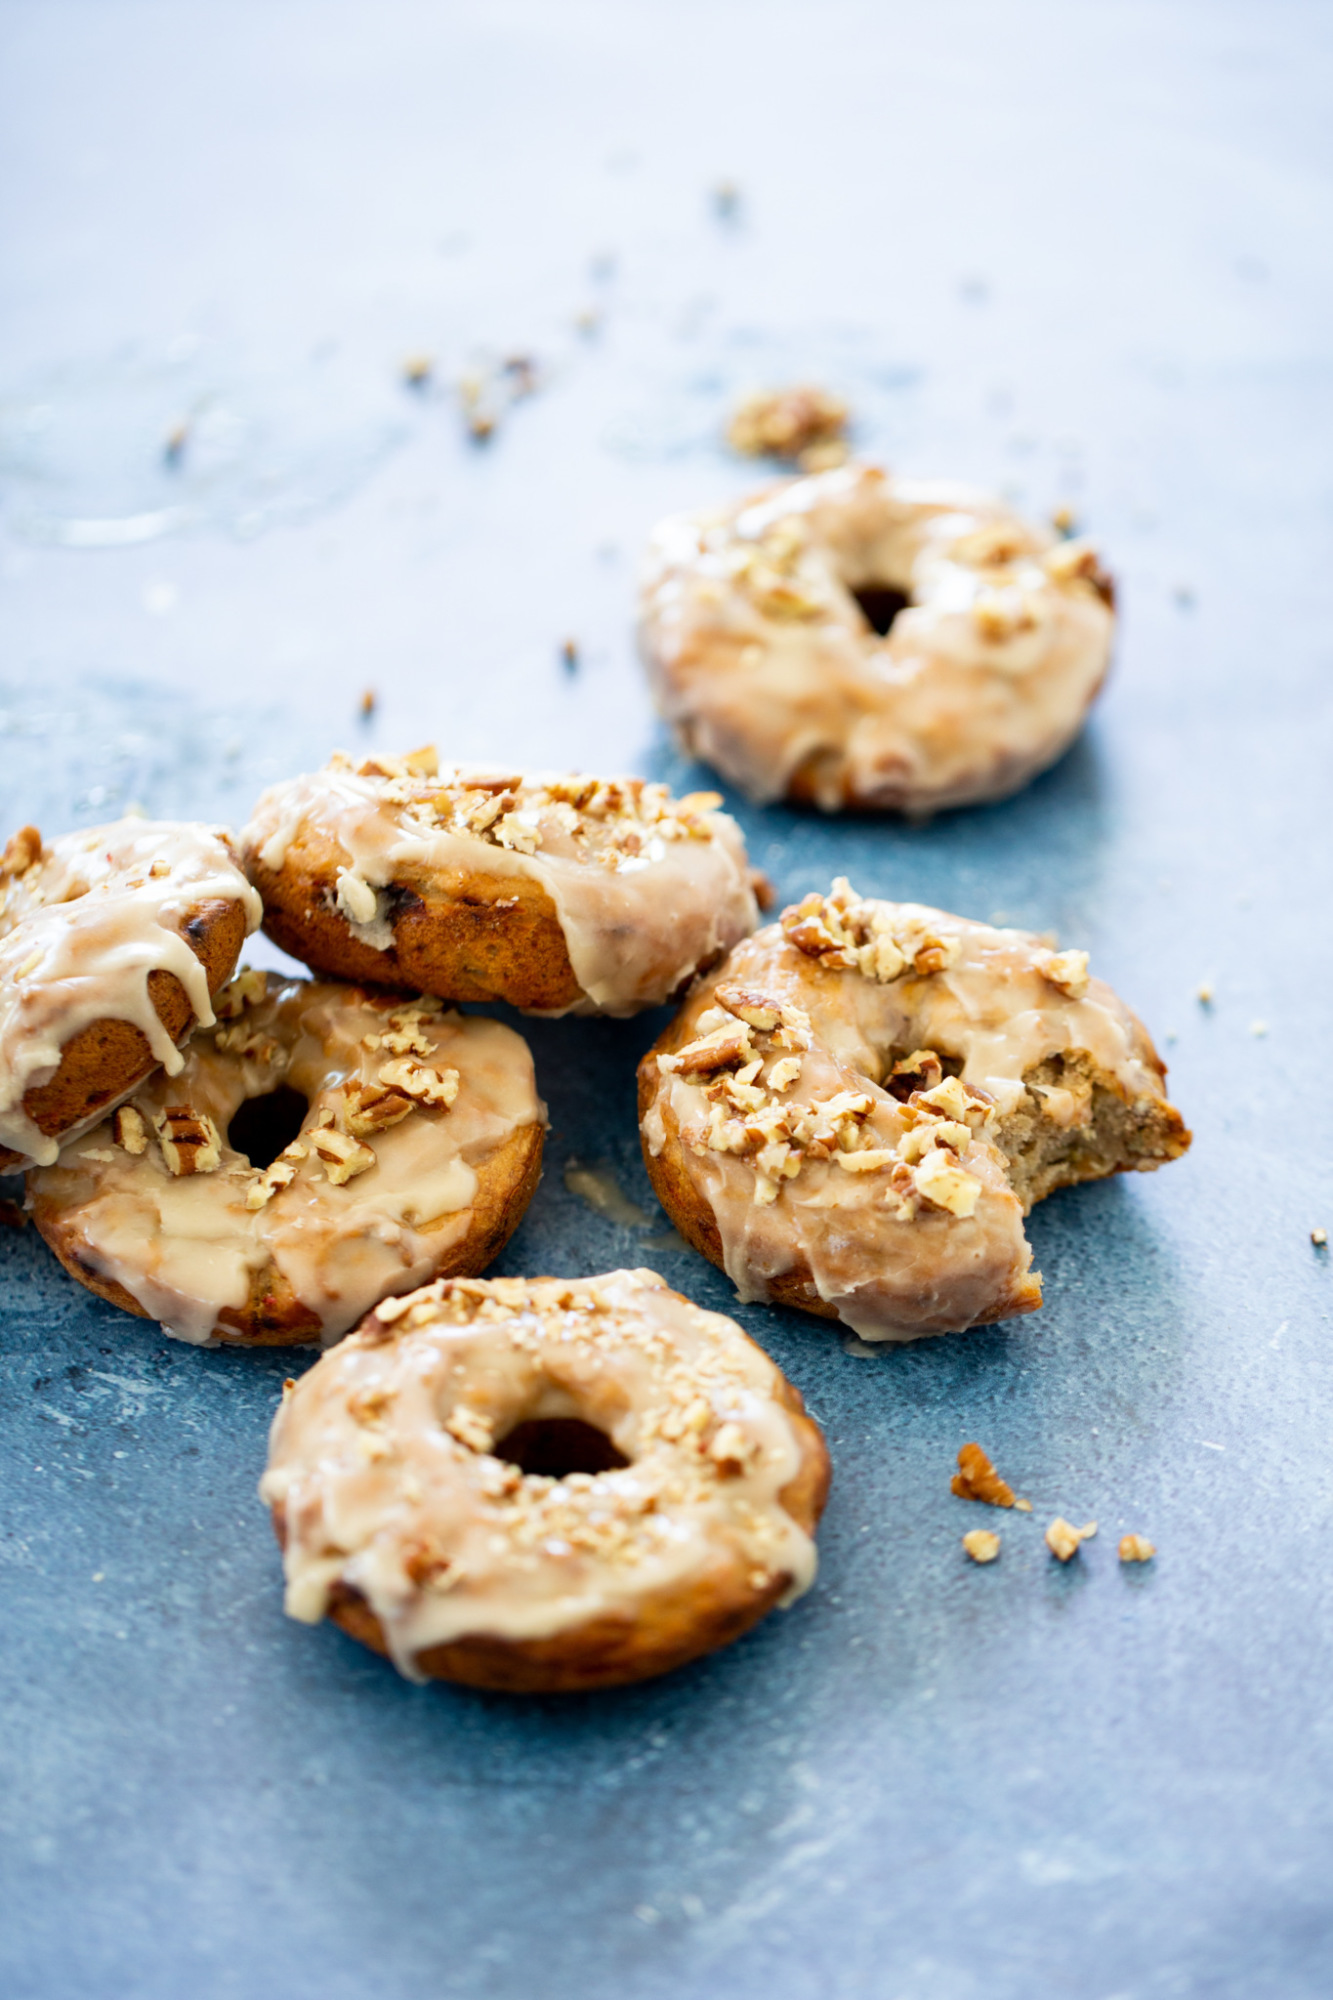 baked vegan banana donuts with maple glaze and sprinkled chopped walnuts